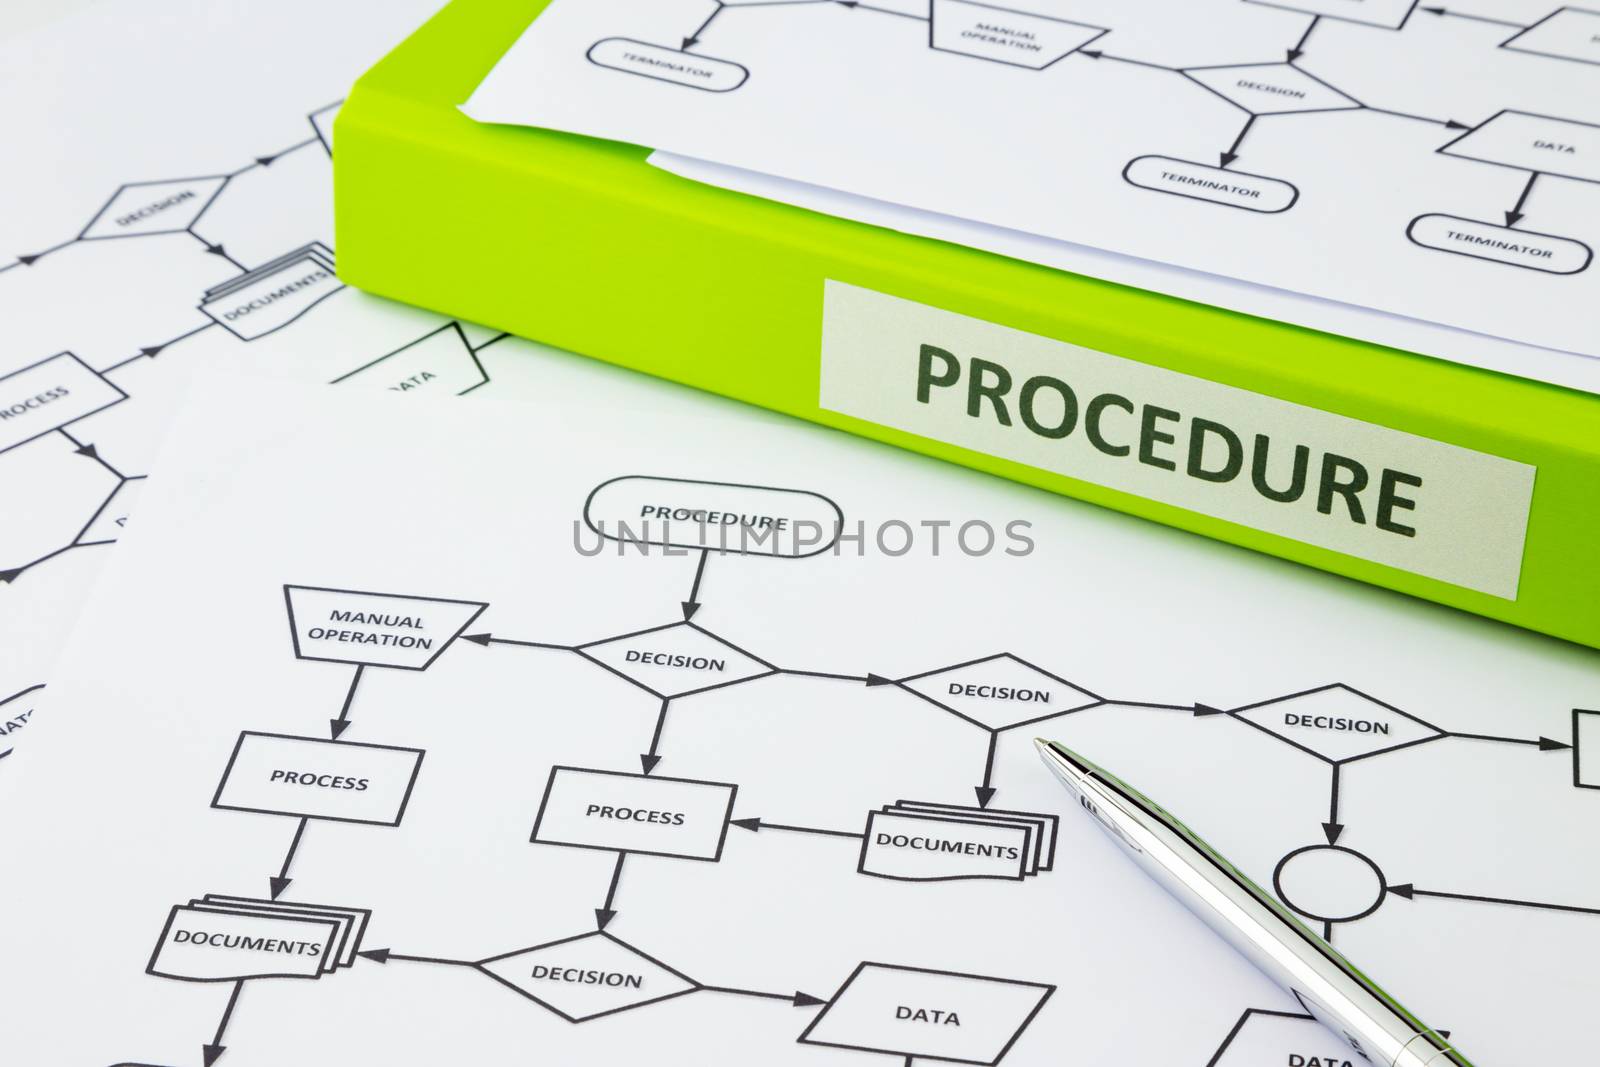 Procedure decision manual and documents by vinnstock